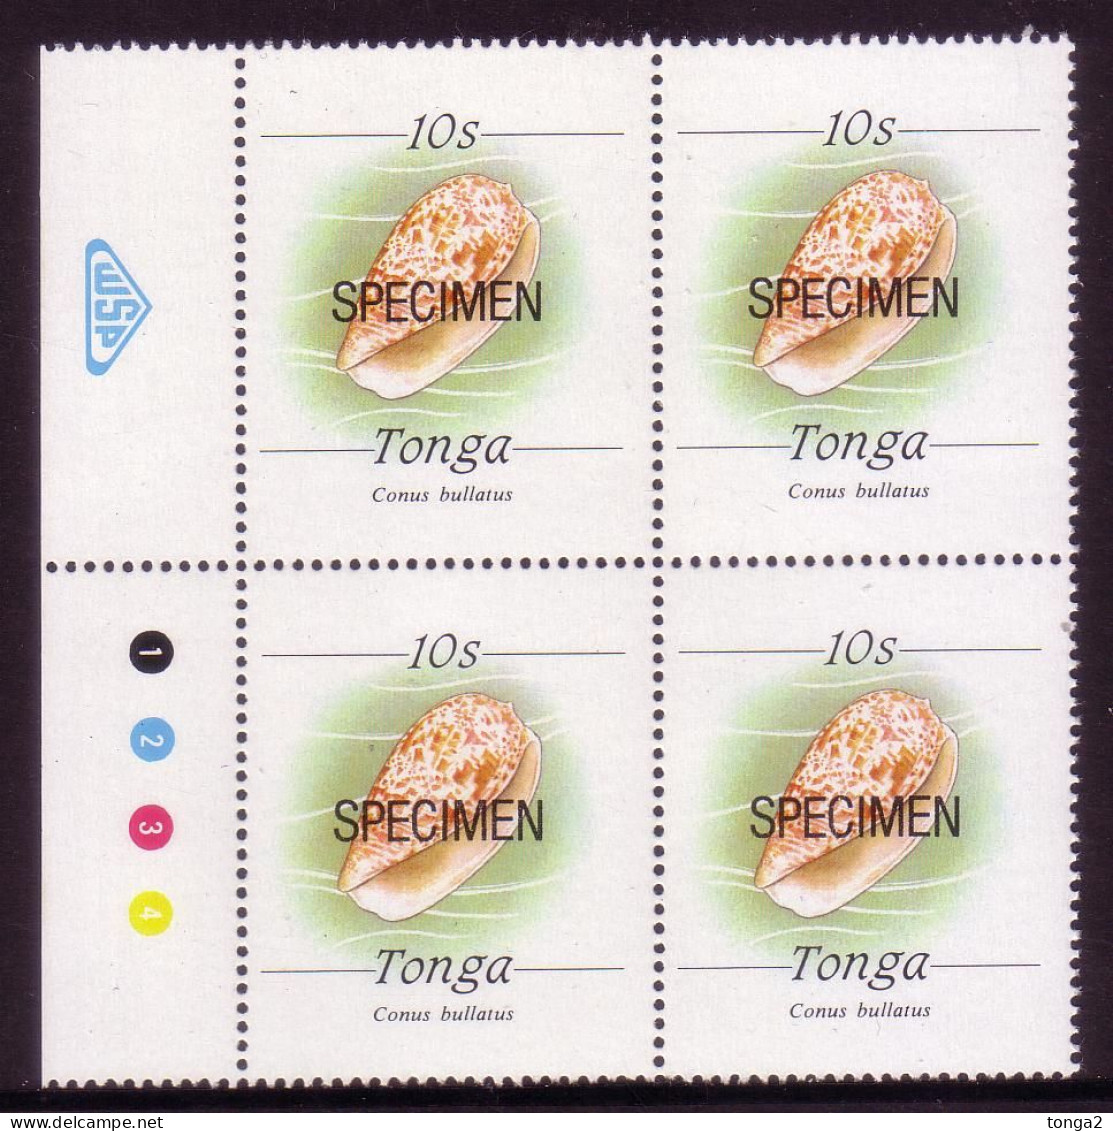 Tonga 1987 10s Shell Block Of 4 Specimen - Scarce (no Date At Bottom) - Coquillages